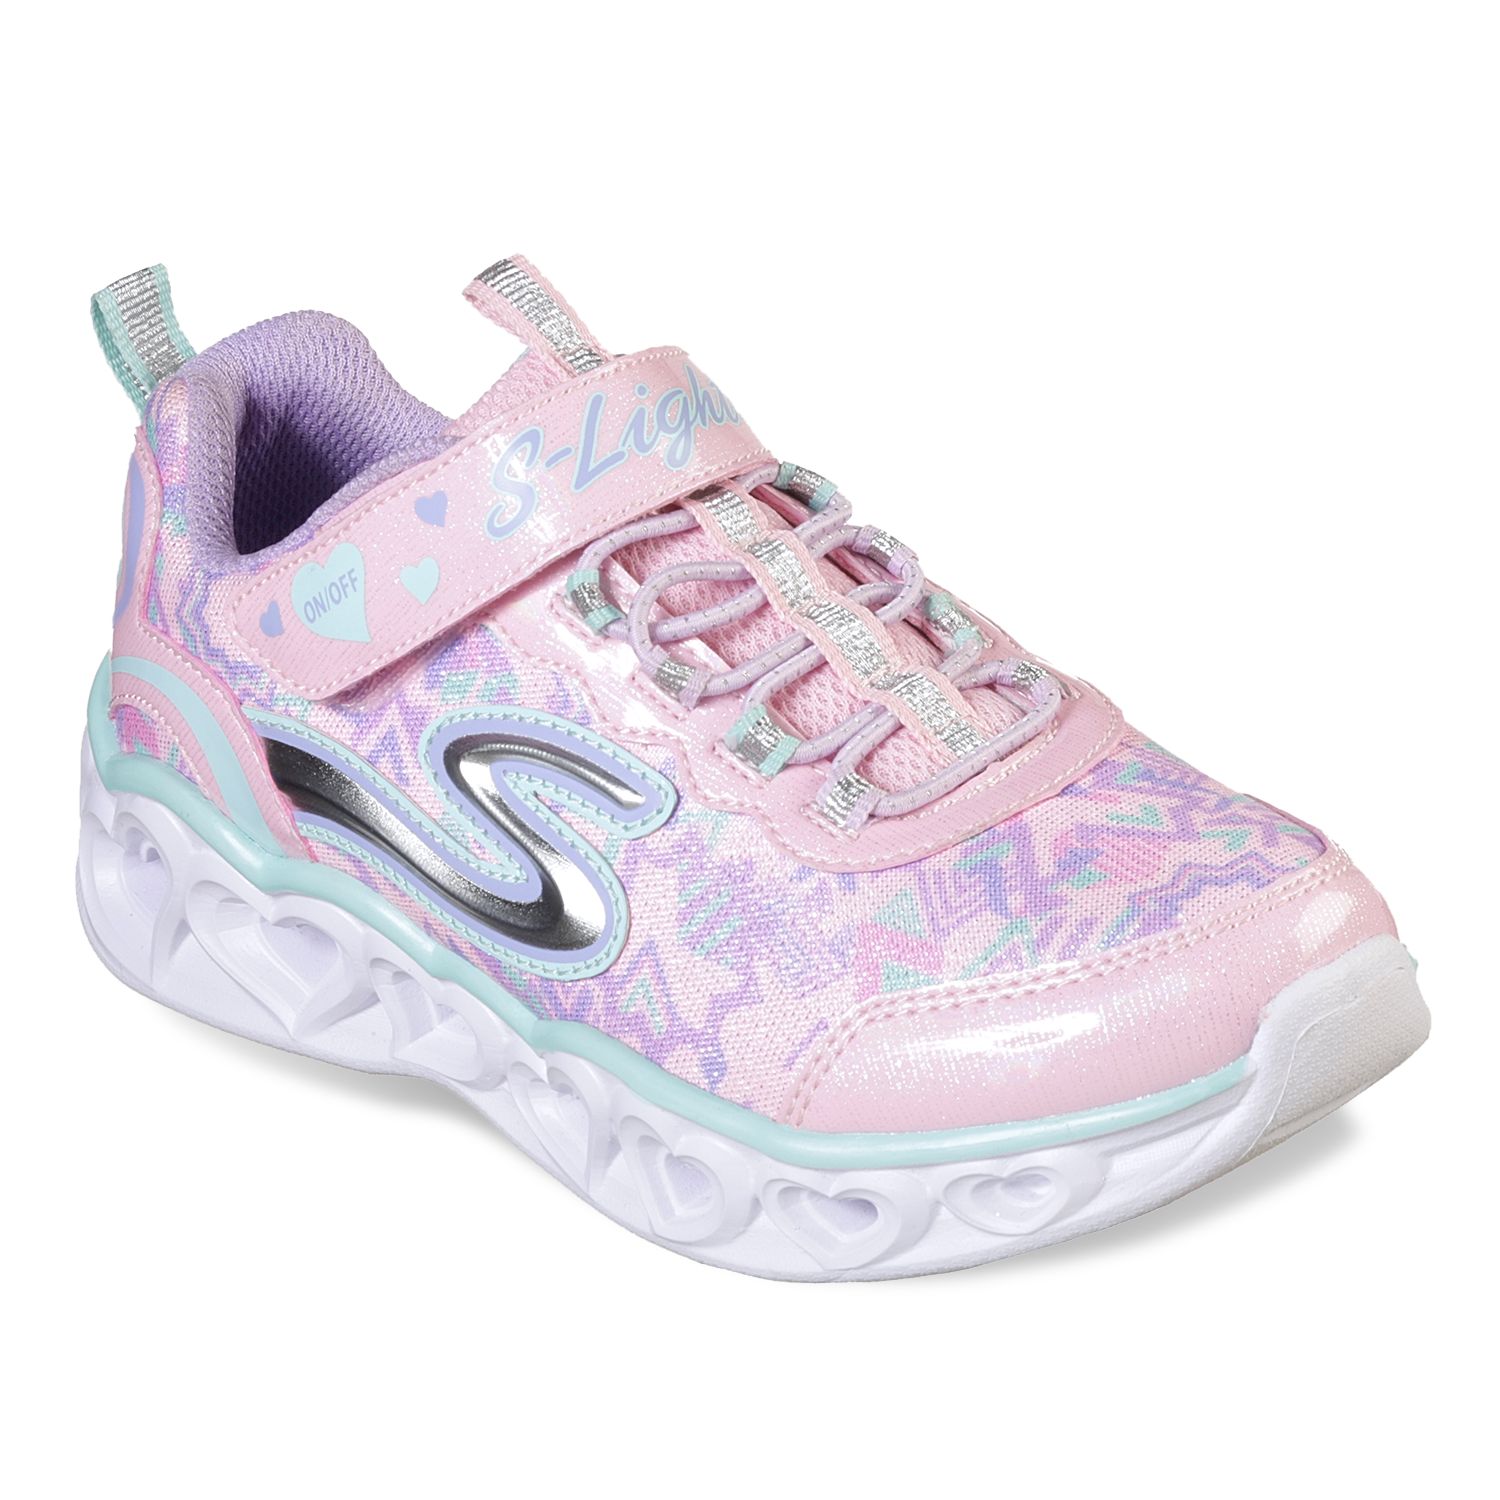 skechers baby light up shoes